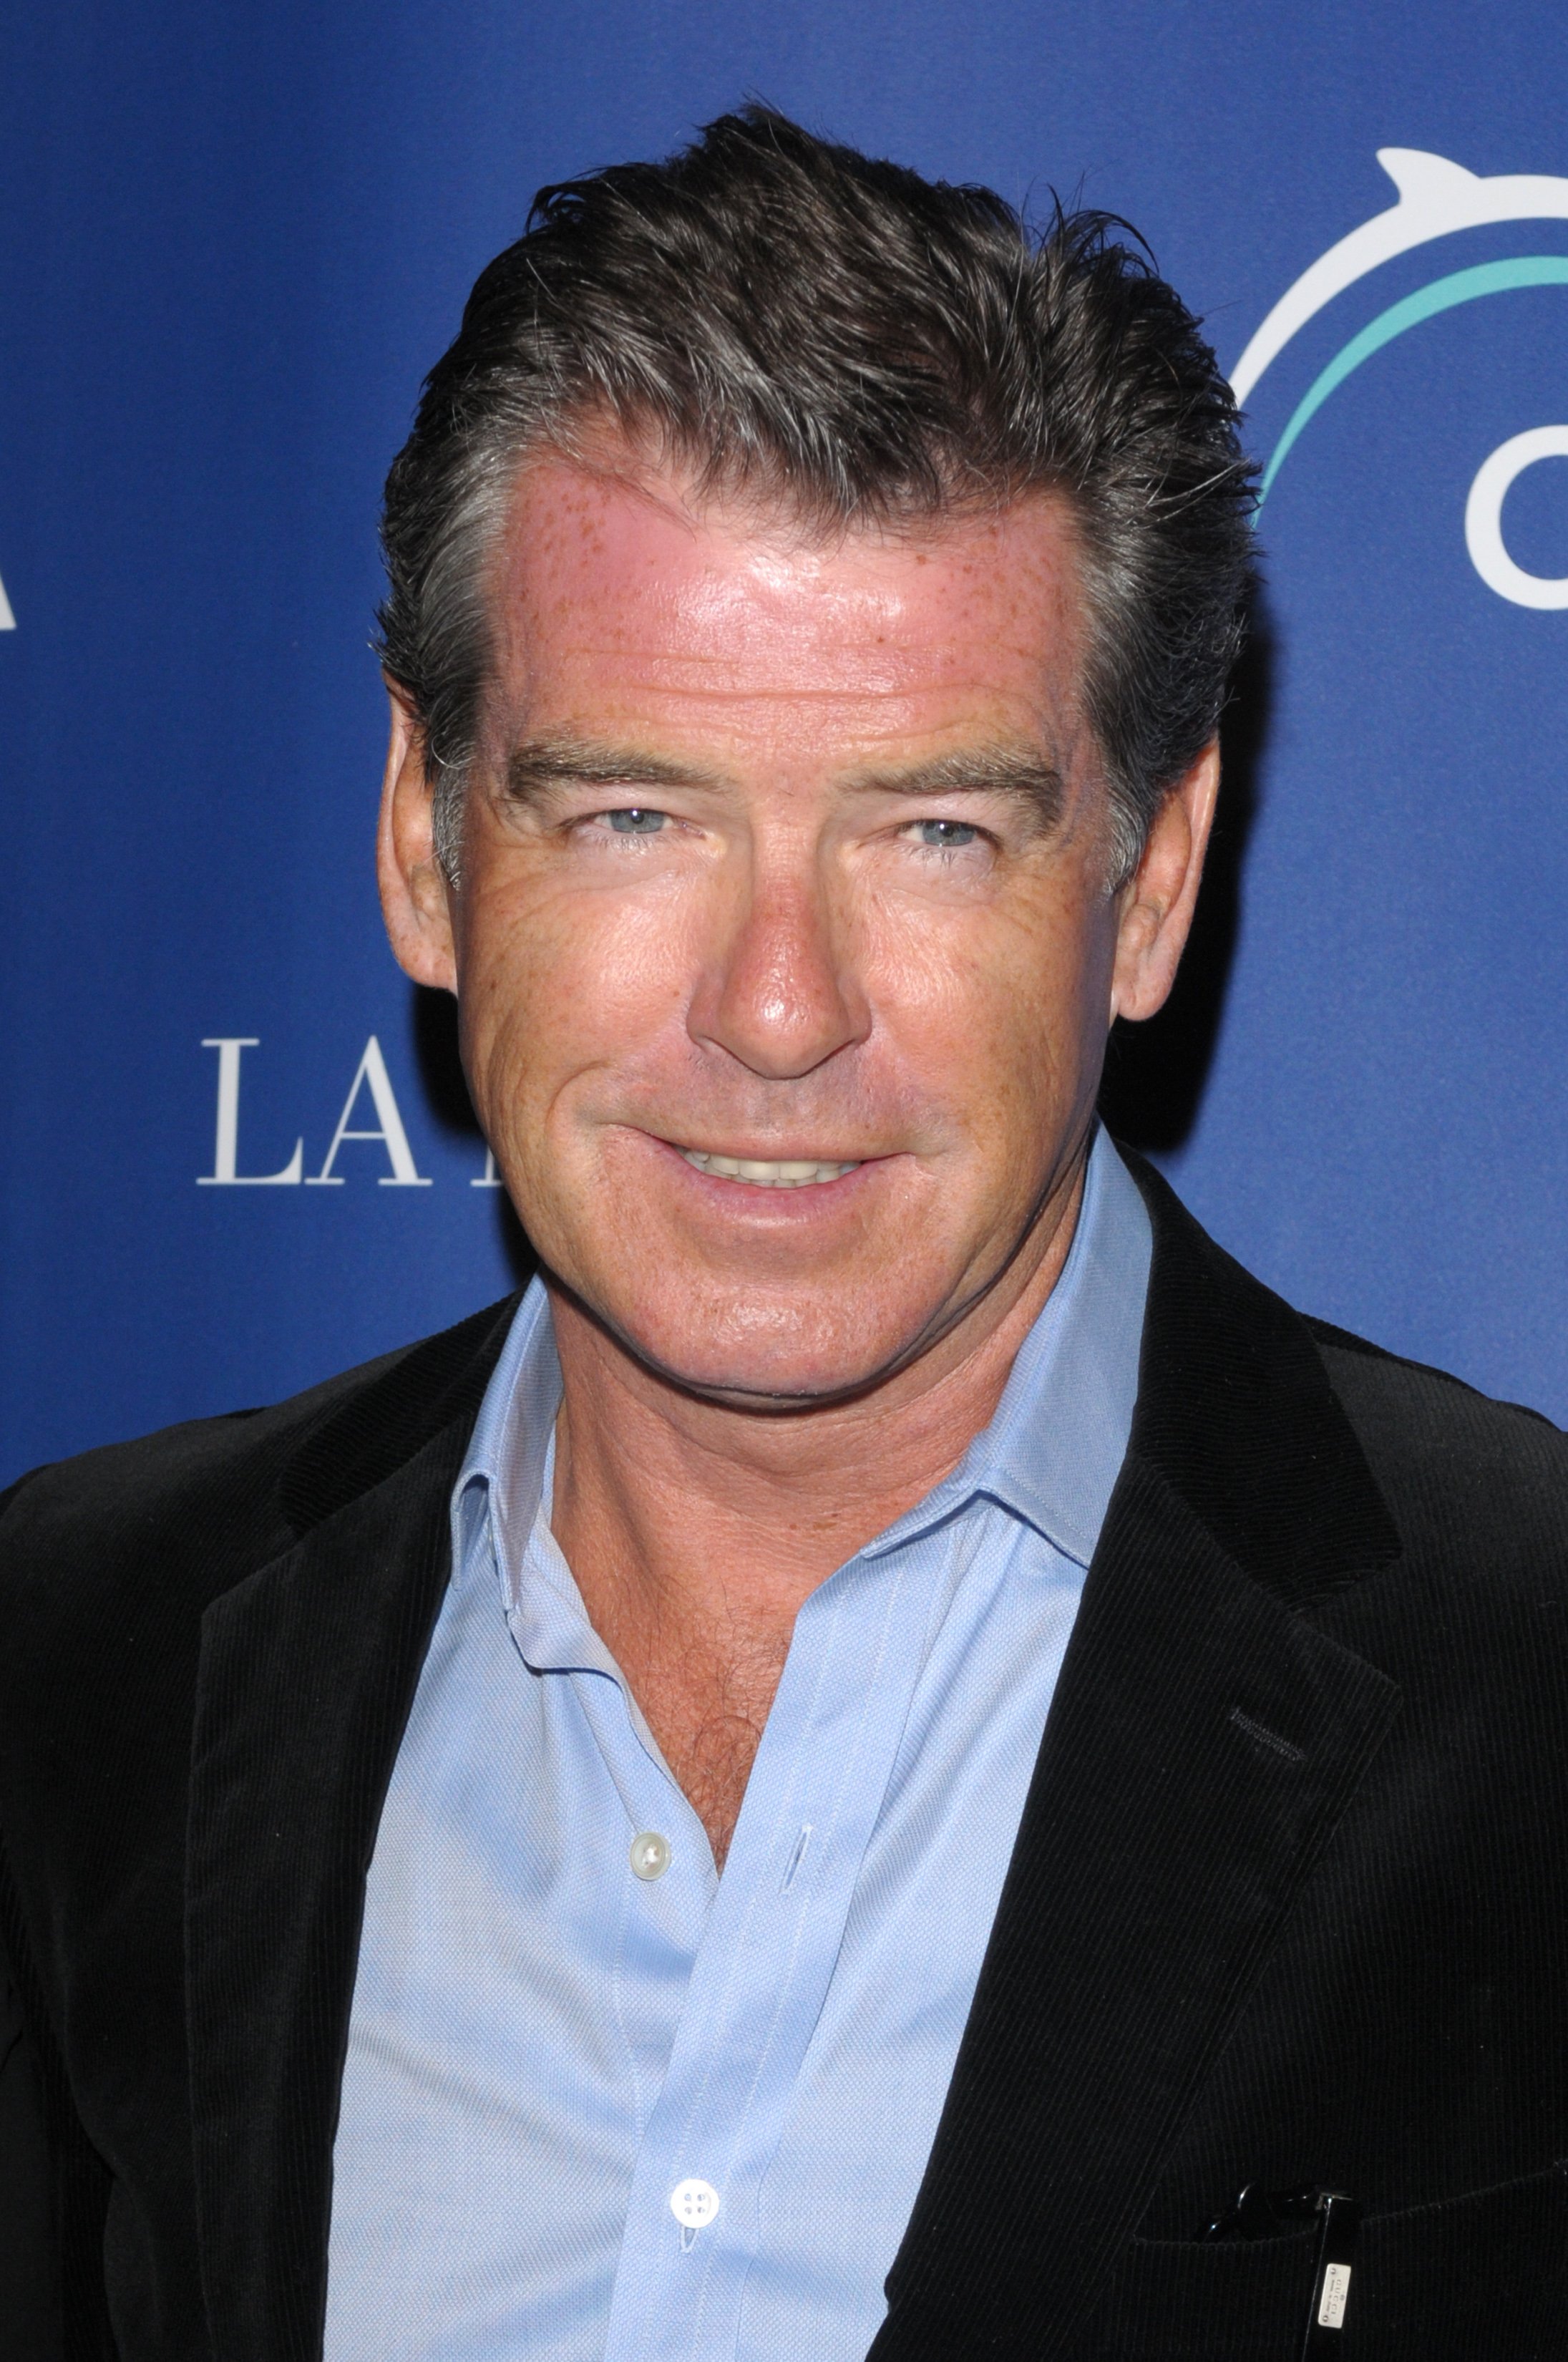 Pierce Brosnan arrives at Oceana's Annual Partners Awards Gala in Pacific Palisades. | Source: Getty Images